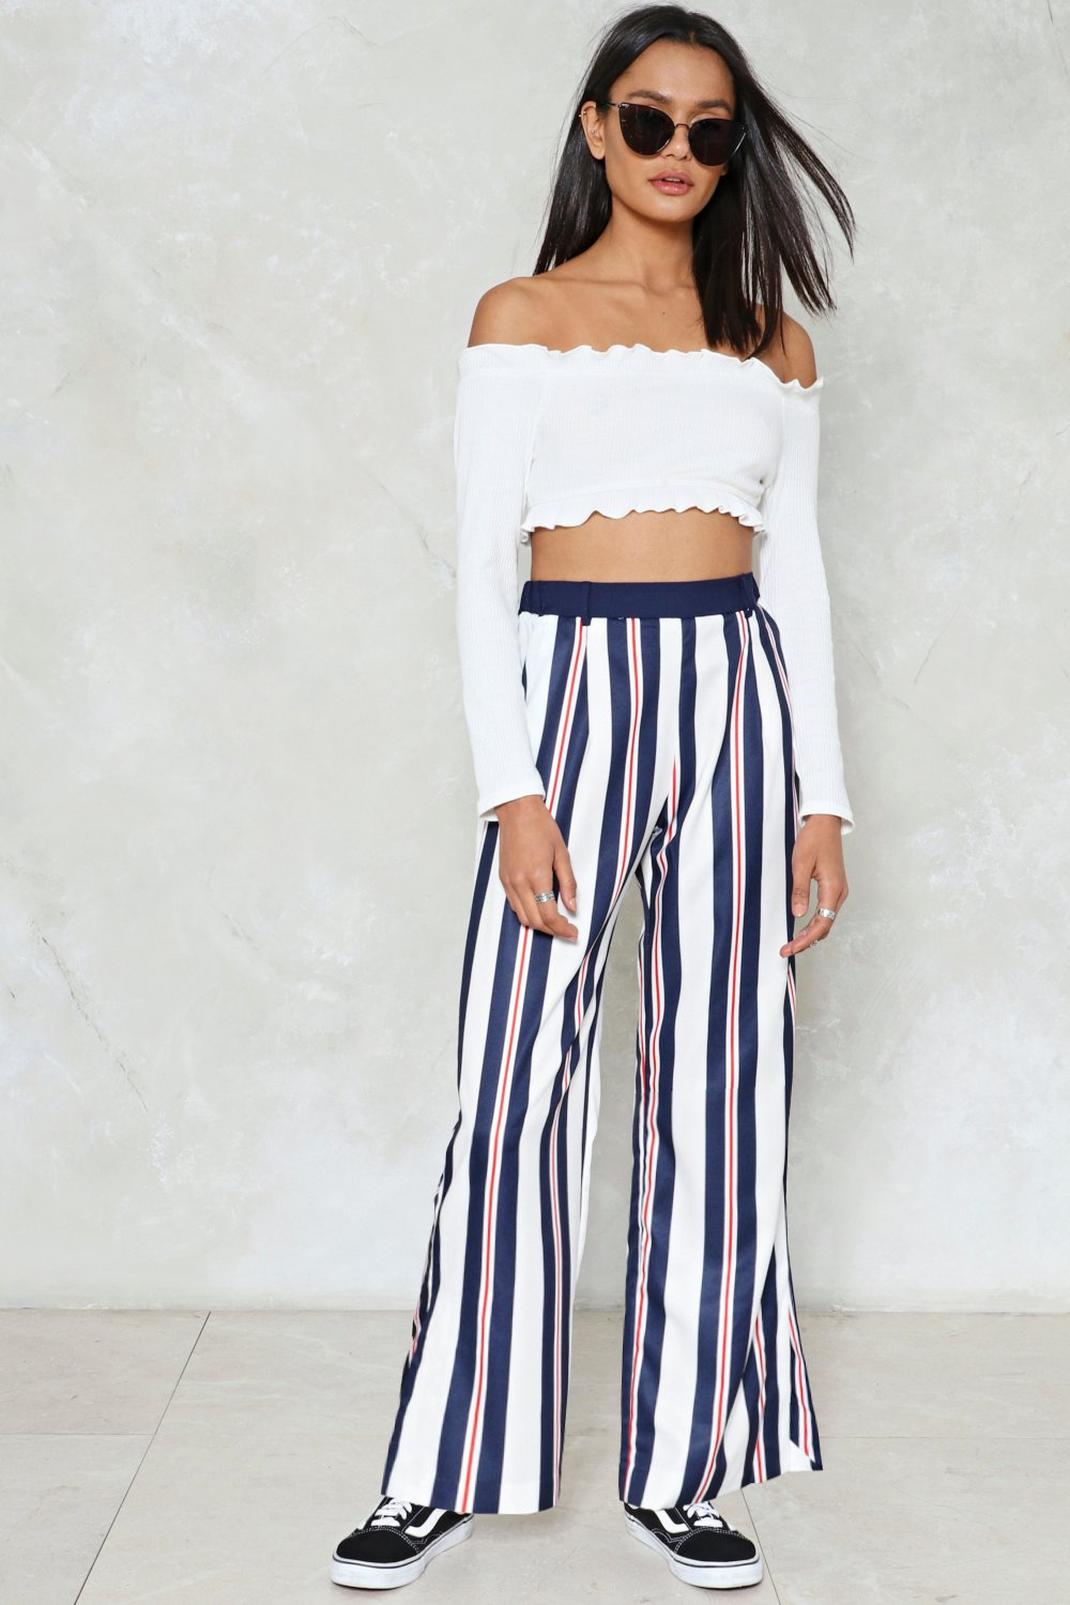 Don't Think Twice Striped Pants | Nasty Gal